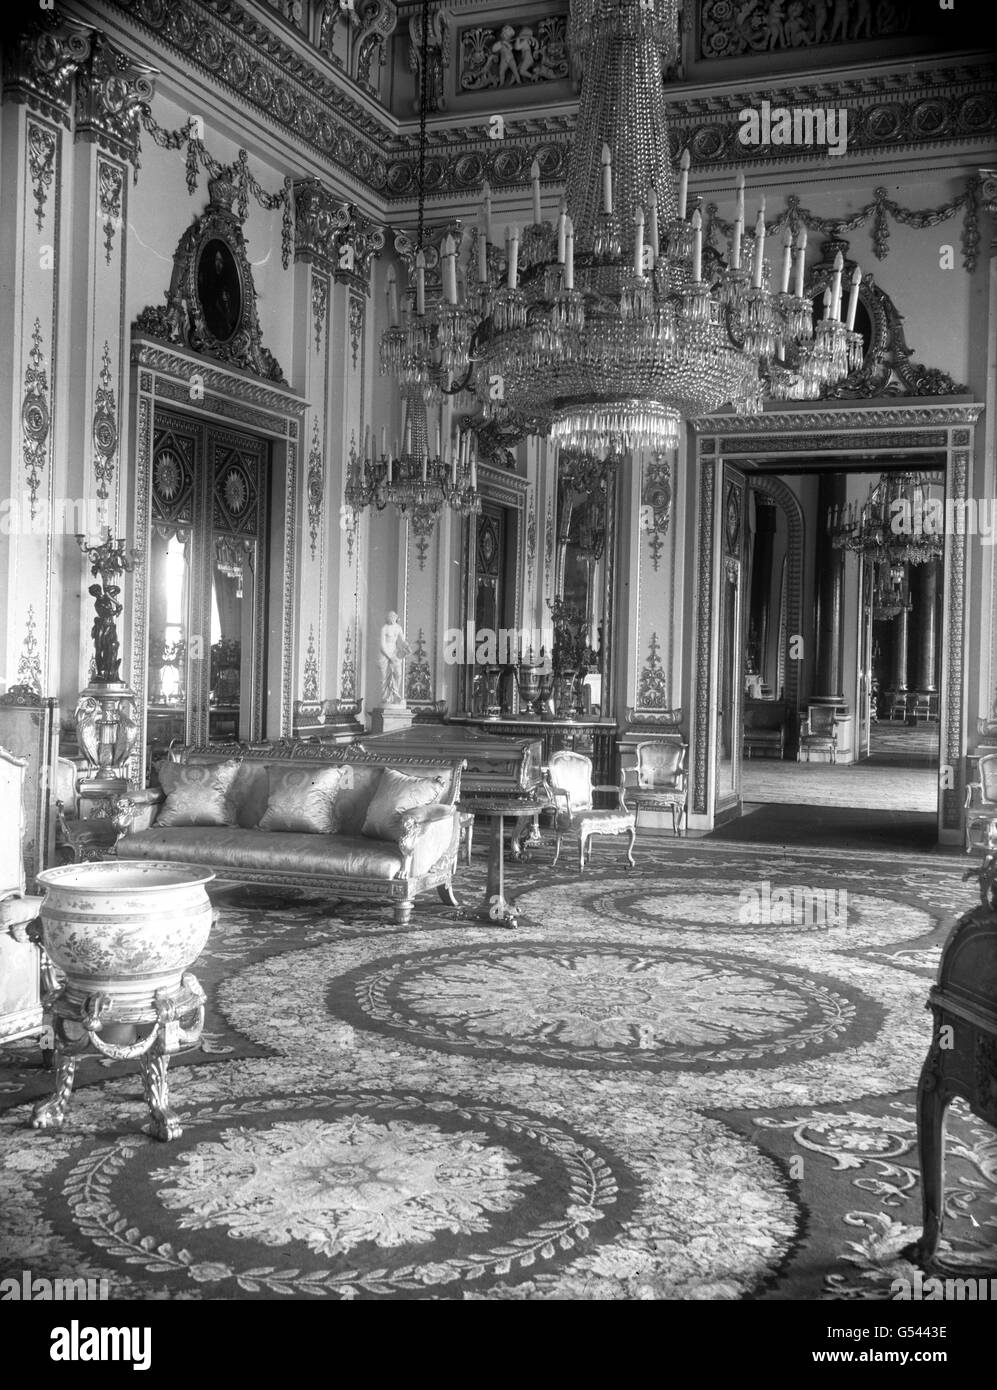 Buildings and Landmarks - White Drawing Room - Buckingham Palace, London. The White Drawing Room inside Buckingham Palace. The room is used for receptions and audiences. Stock Photo